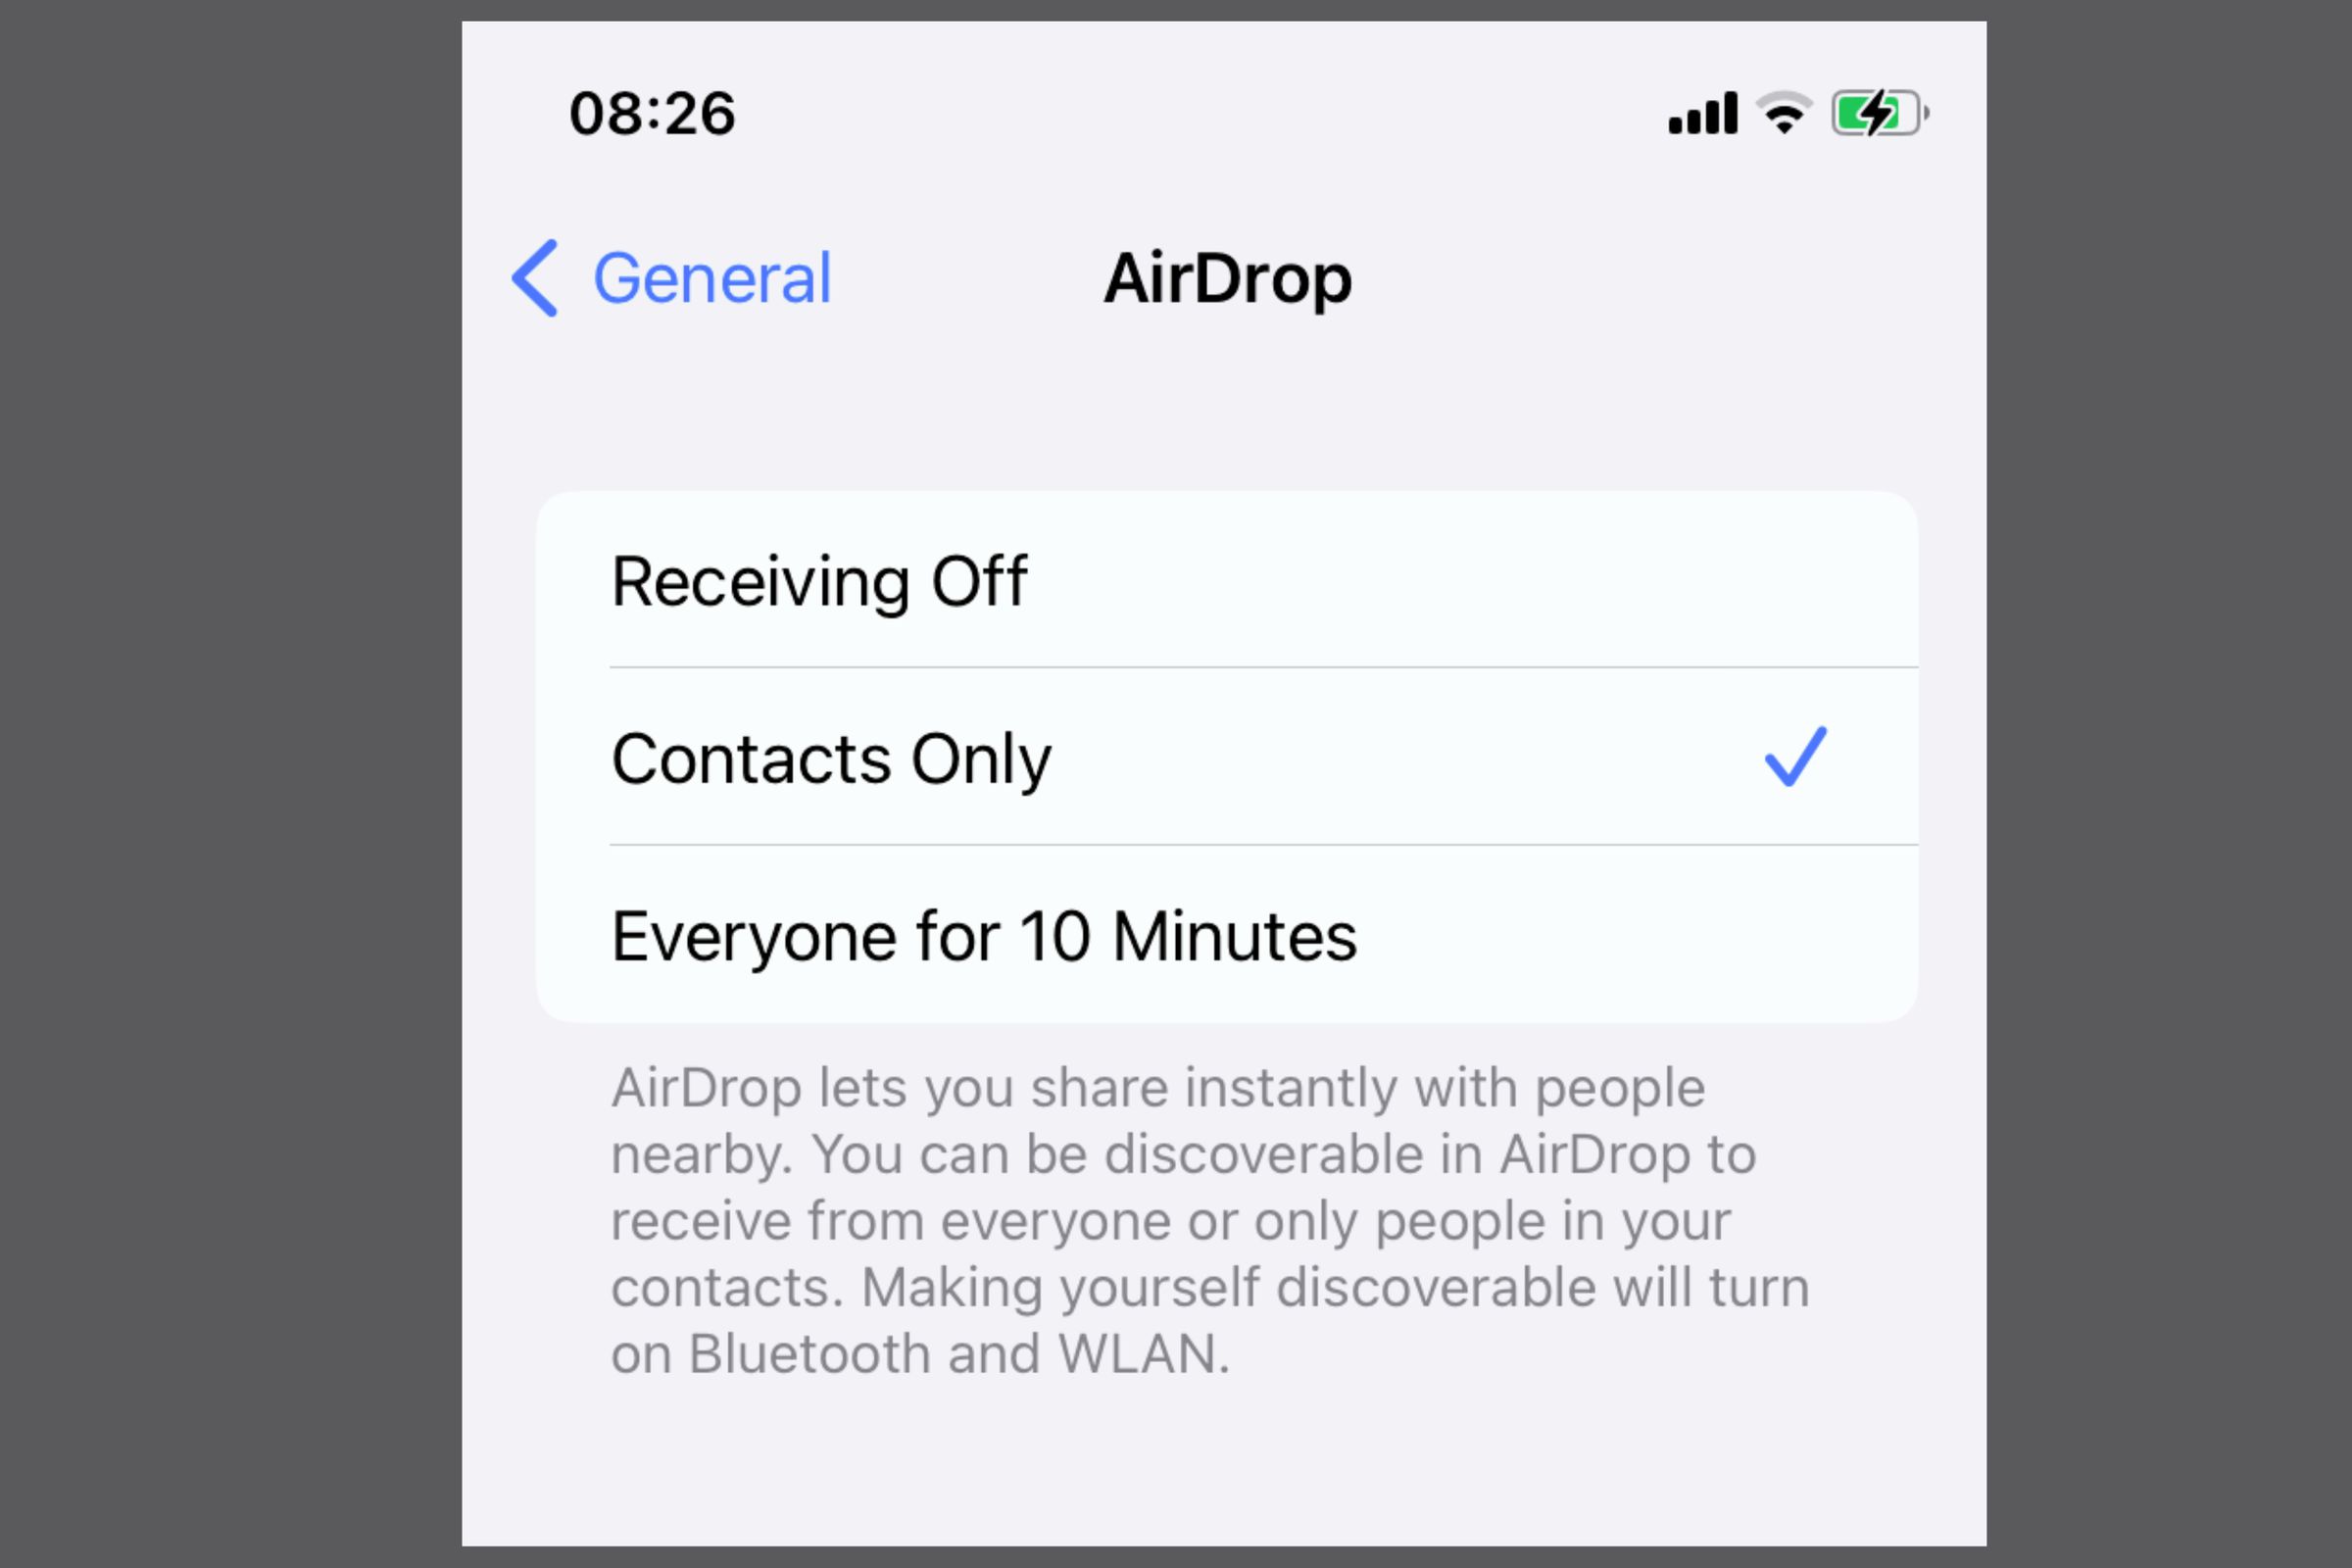 A screeshot of AirDrop on an iPhone, displaying the options of “Recieveing Off”, “Contacts Only”, and “Everyone for 10 Minutes.”